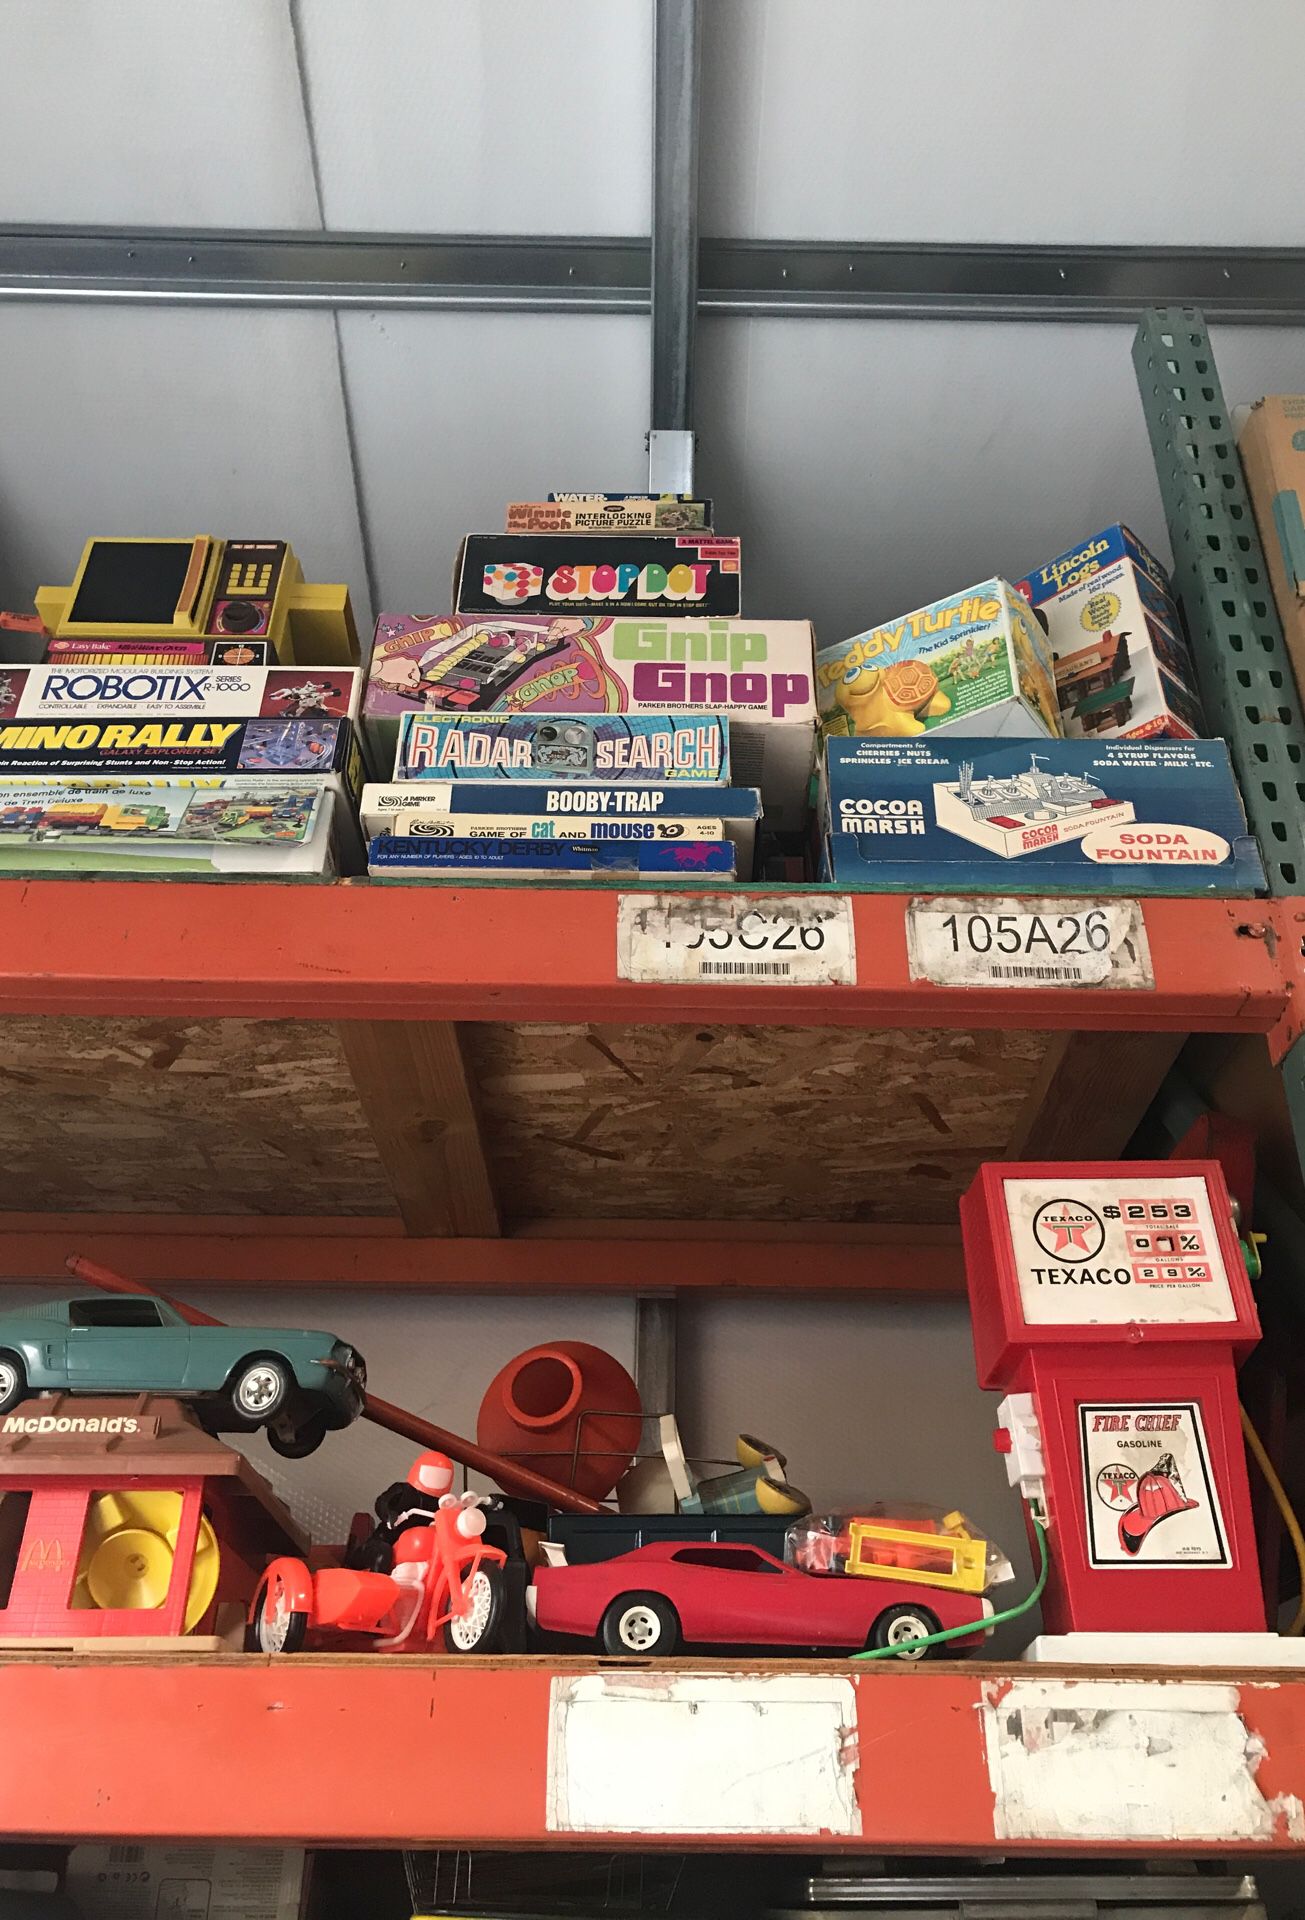 Lots of cool toys and collectibles